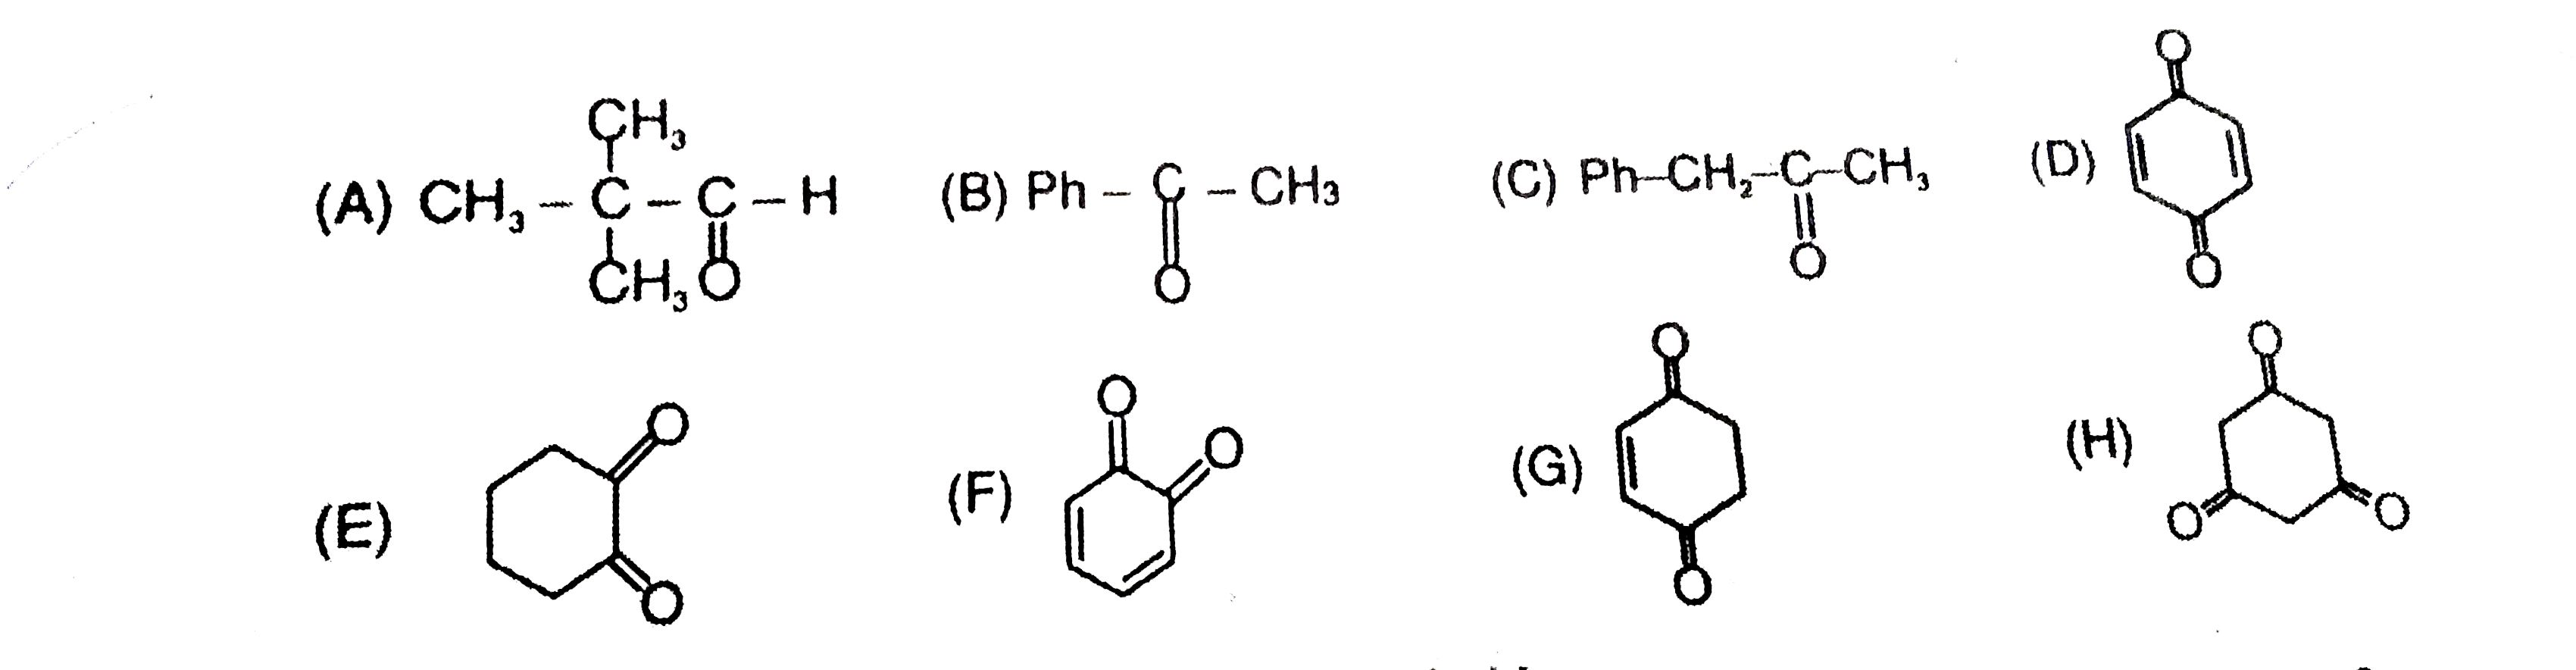 Which of the following compounds are exhibit tautomerism?